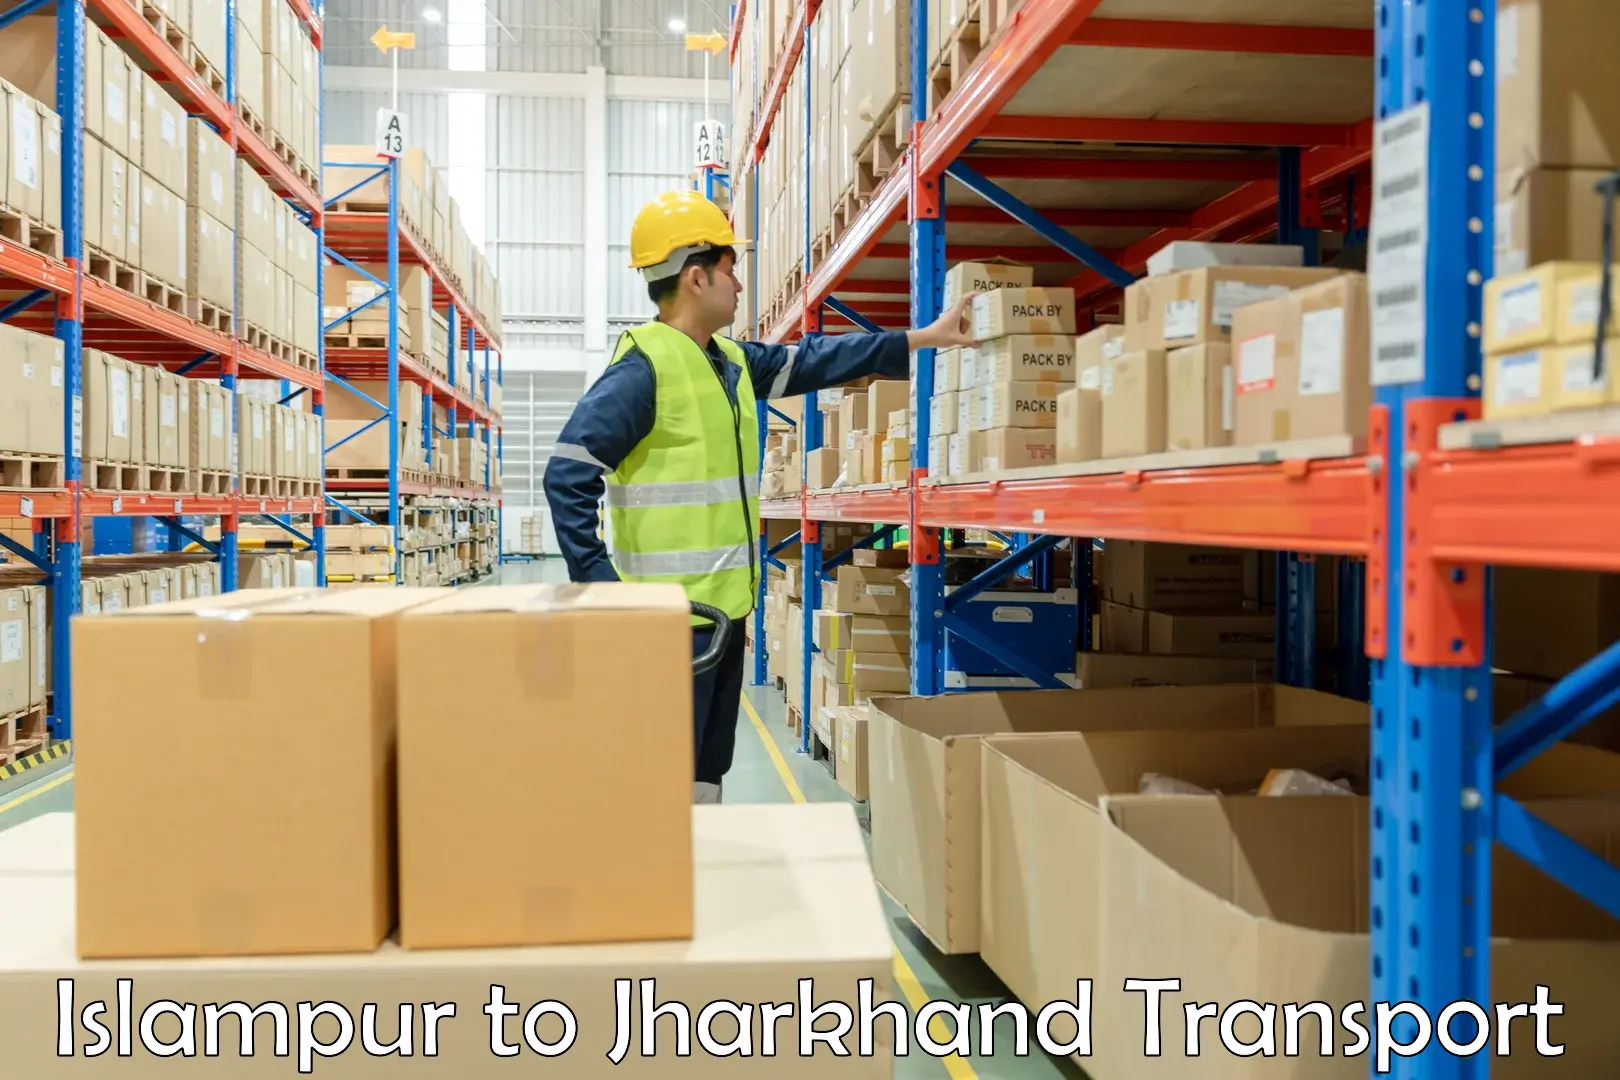 Furniture transport service in Islampur to Chouparan